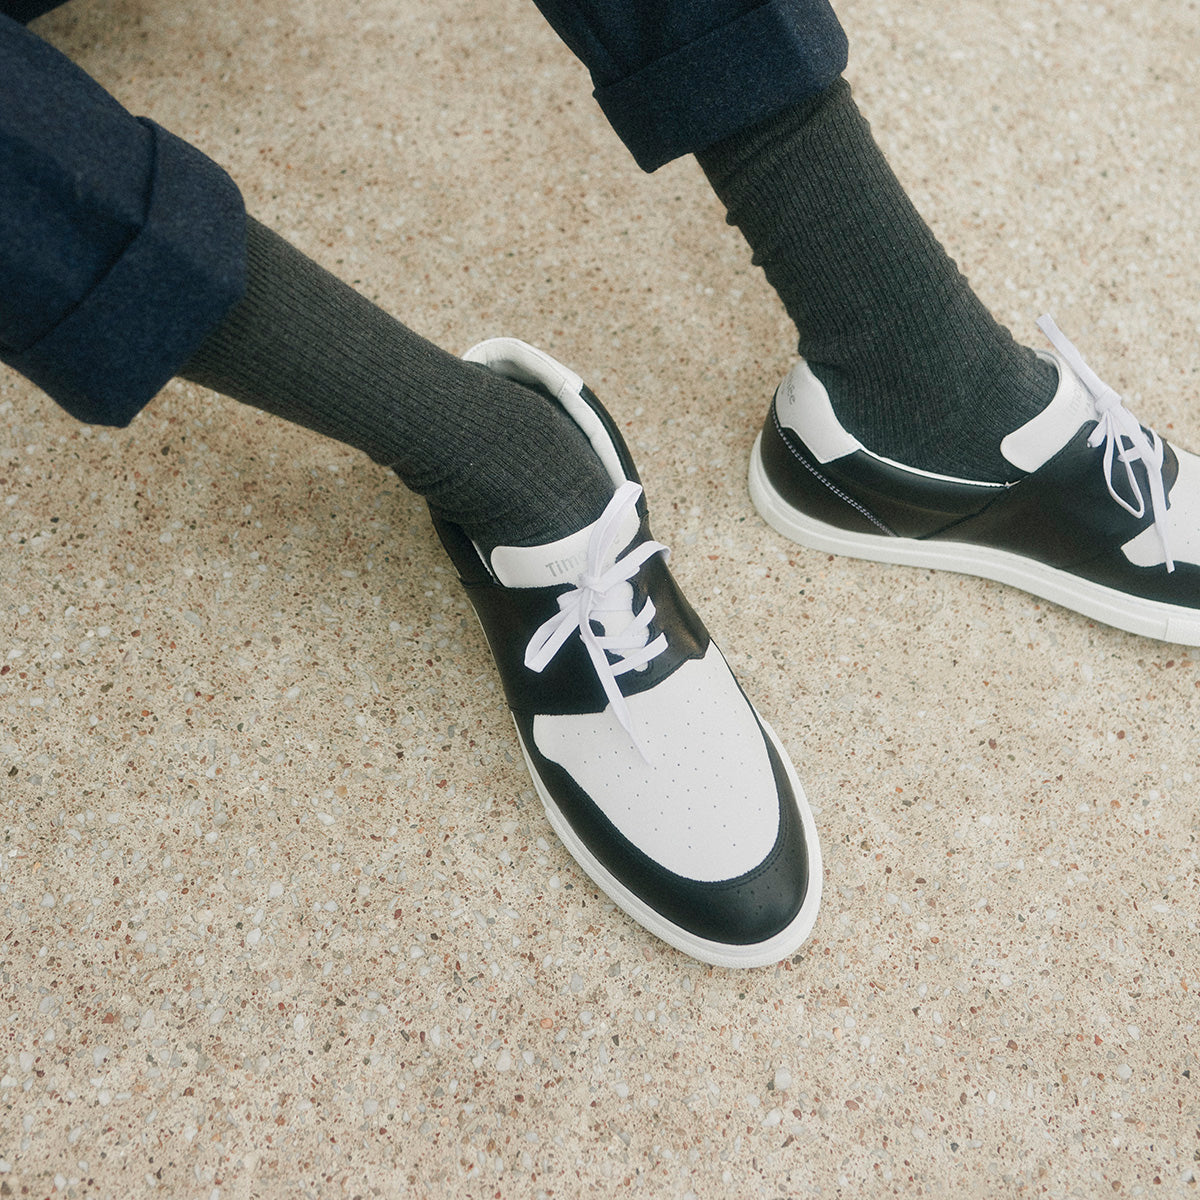 hand crafted sneaker pyla by timothee paris worn with navy trousers by a model